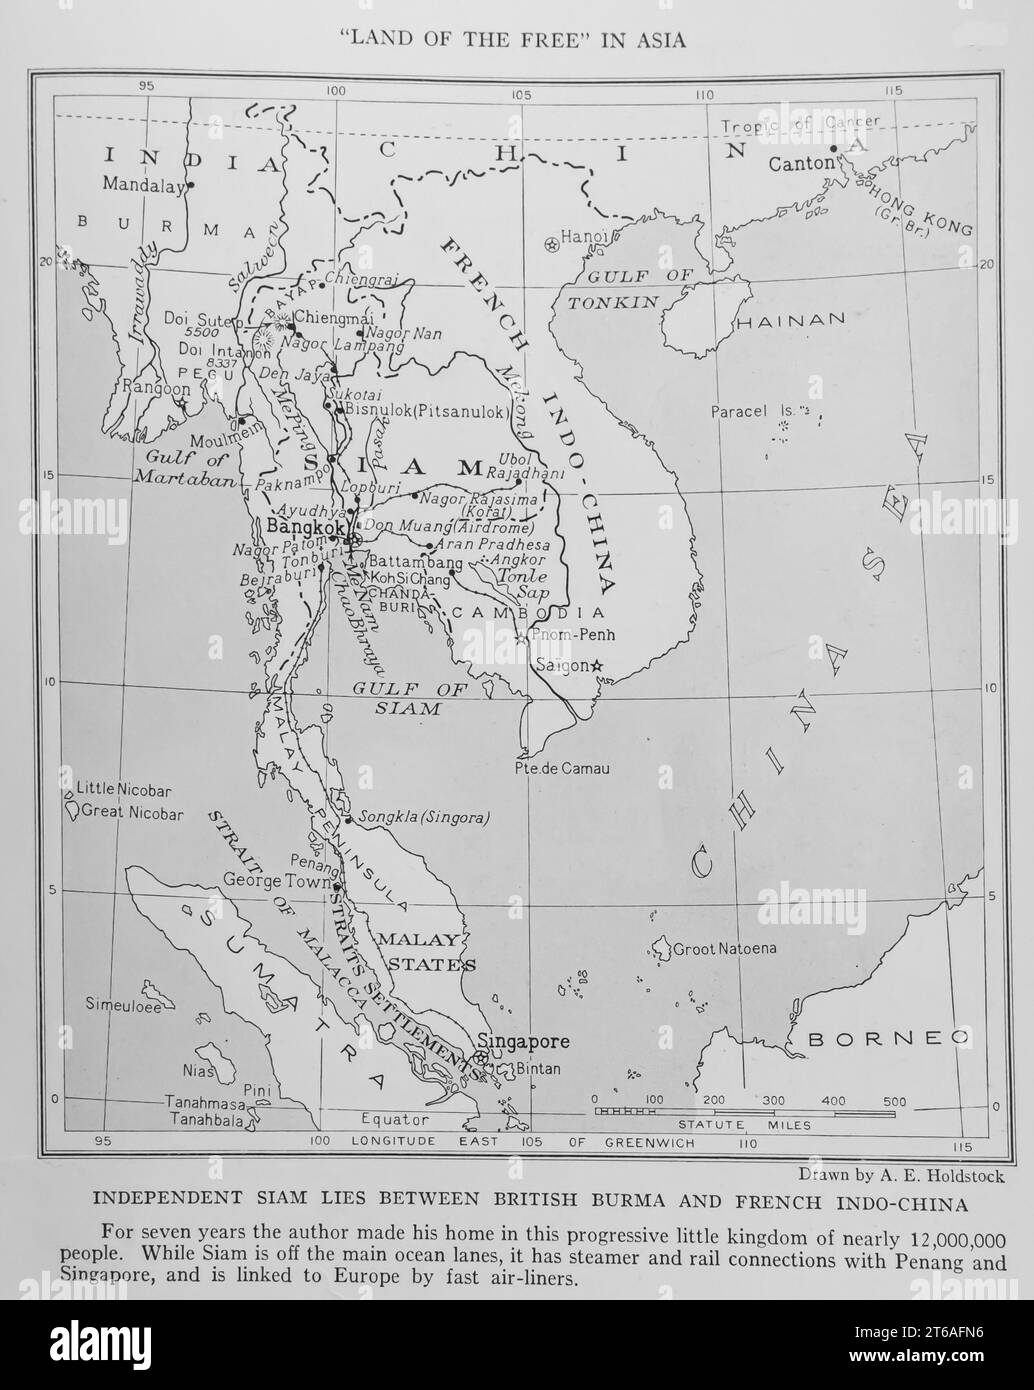 1934 Siam, Land of the Free in Asia Map published in National Geographic magazine Stock Photo